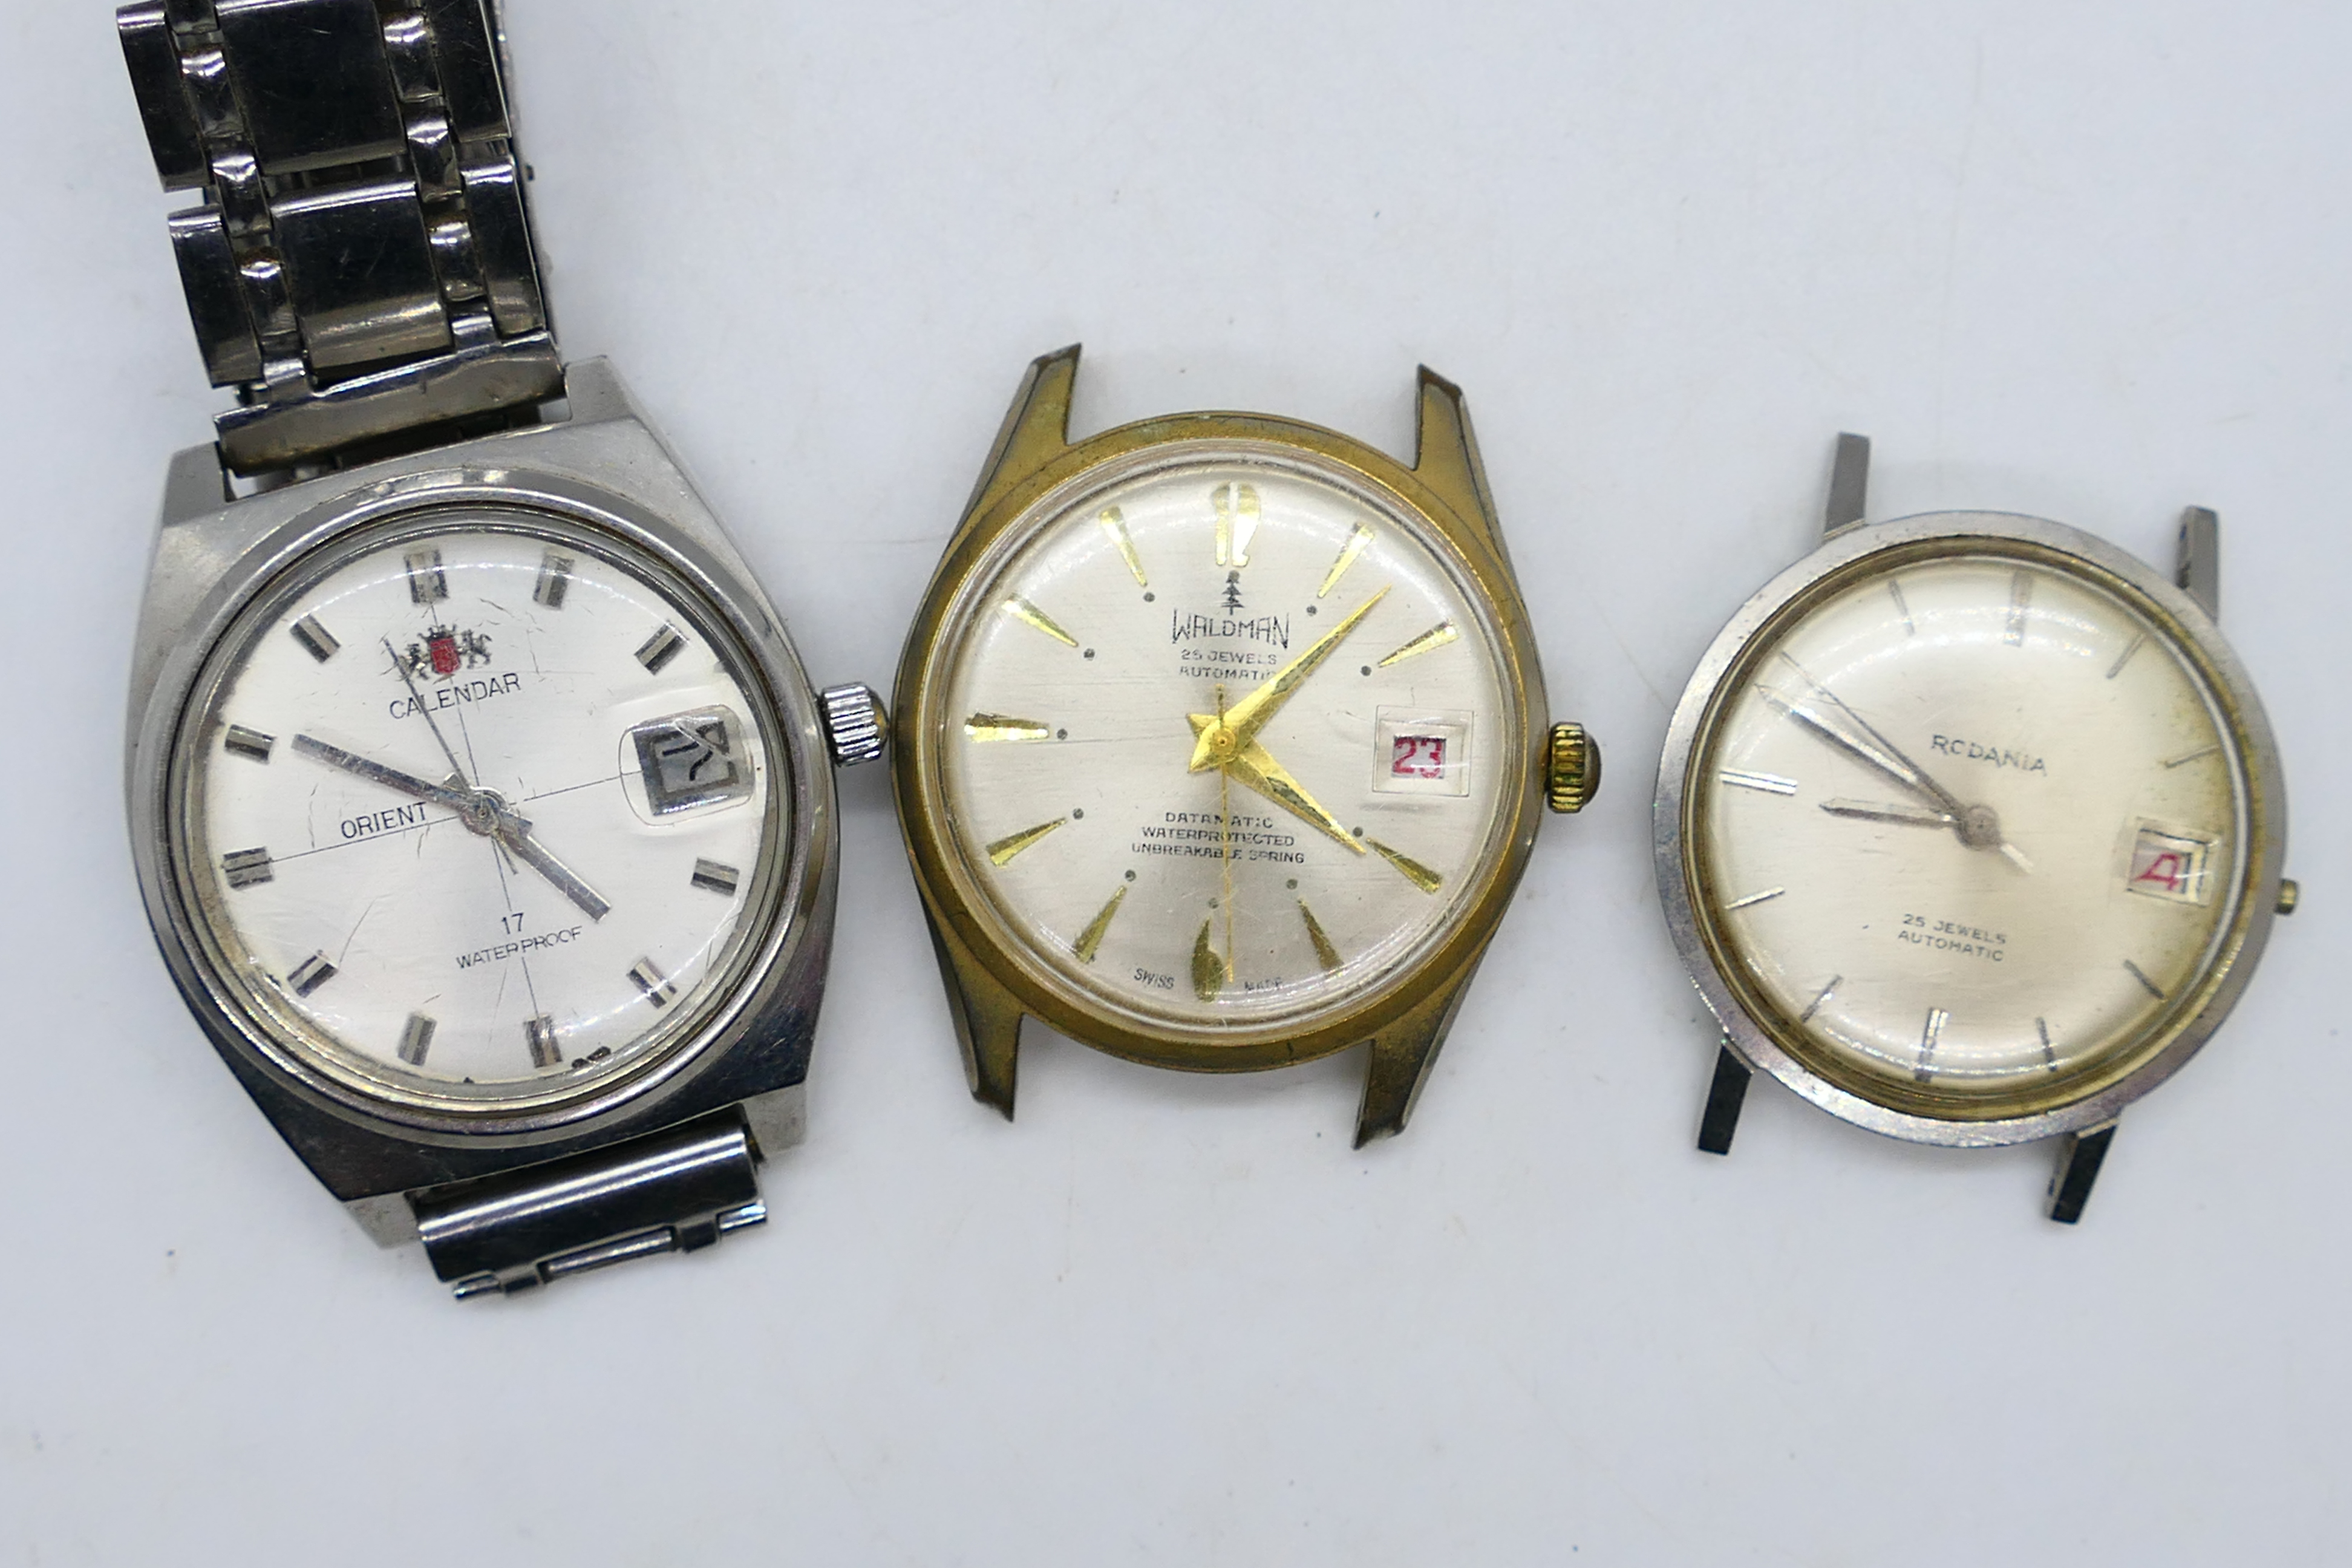 Three gentleman's wrist watches to include Waldman, Rodania (both lacking straps) and other.